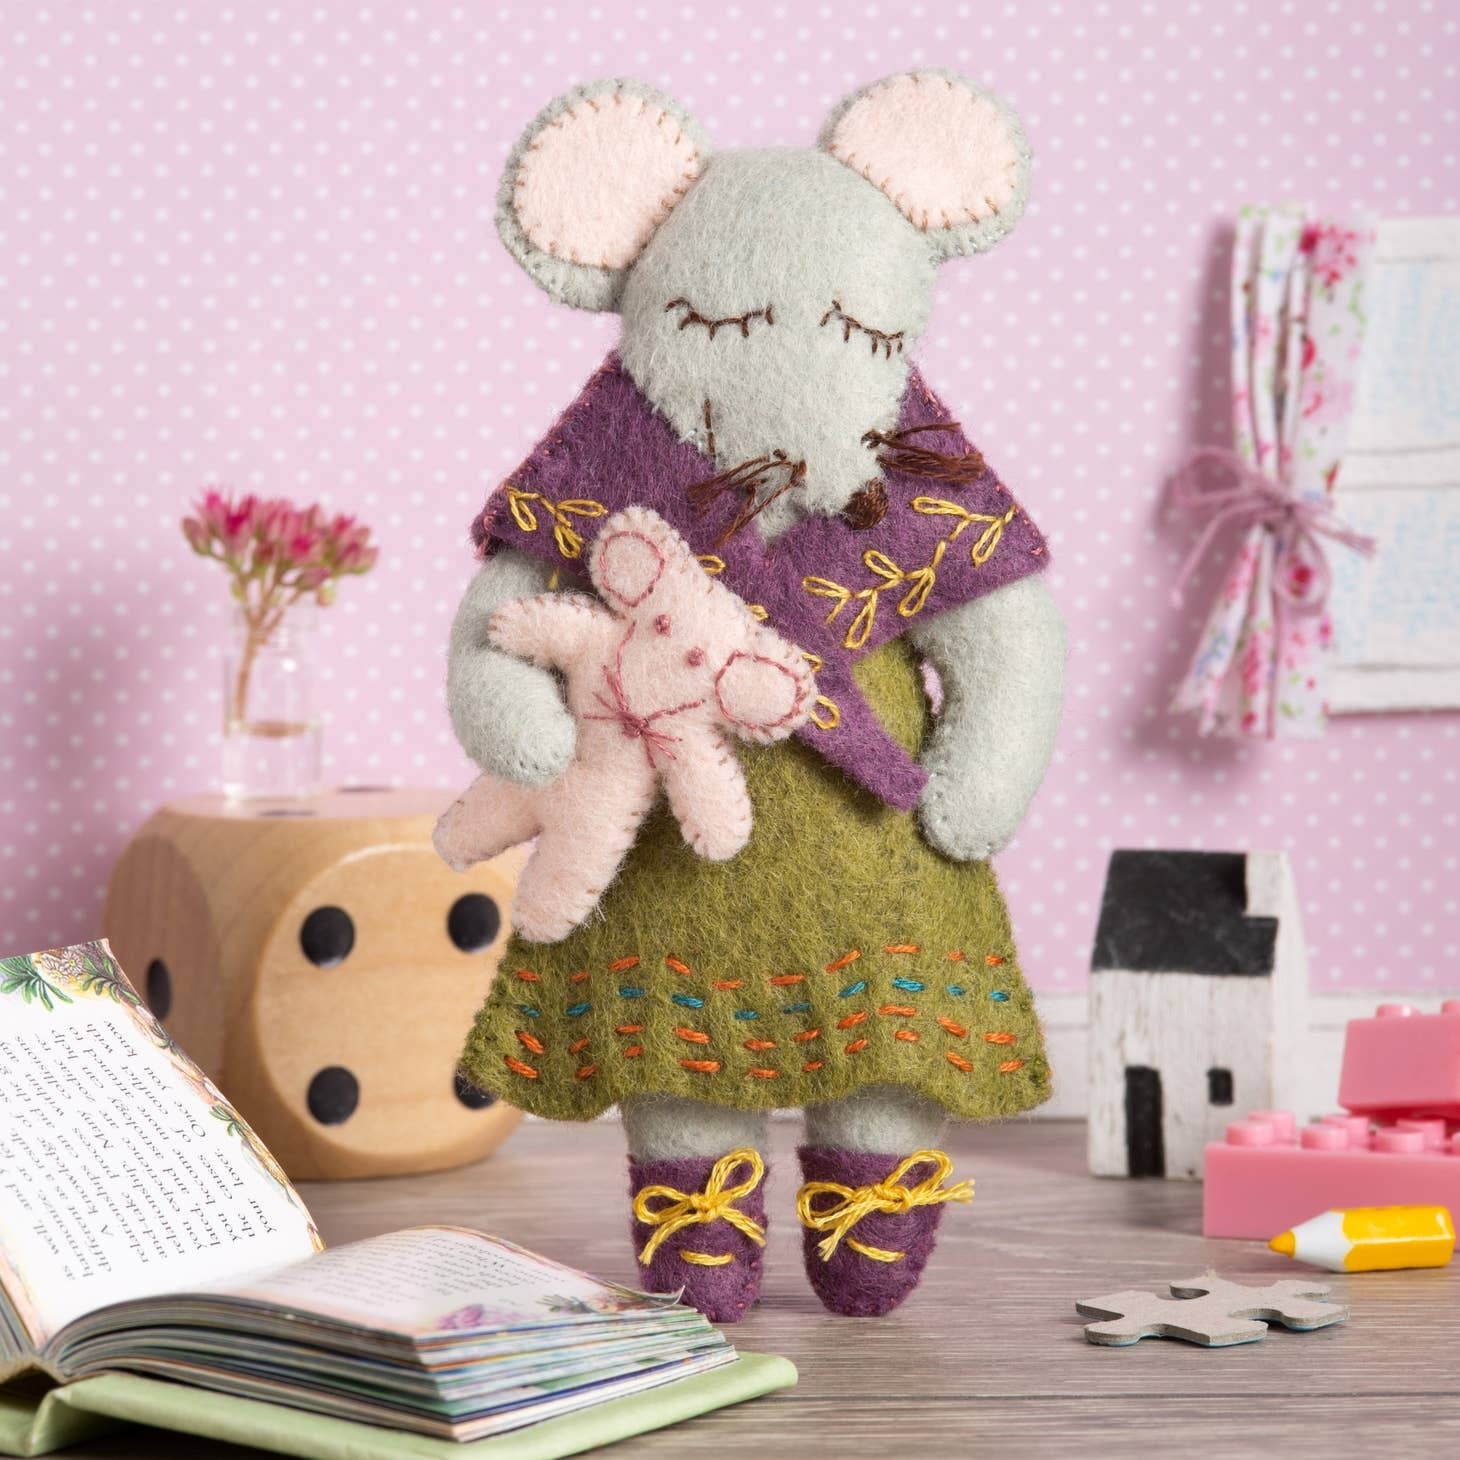 Handcrafted felt mouse figure from the 'Little Miss Mouse Felt Craft Mini Kit', showcasing a delicately dressed mouse holding a soft pink toy against a playful purple polka dot backdrop, surrounded by crafting essentials like a storybook, ribbon-tied fabric, and wooden toys.